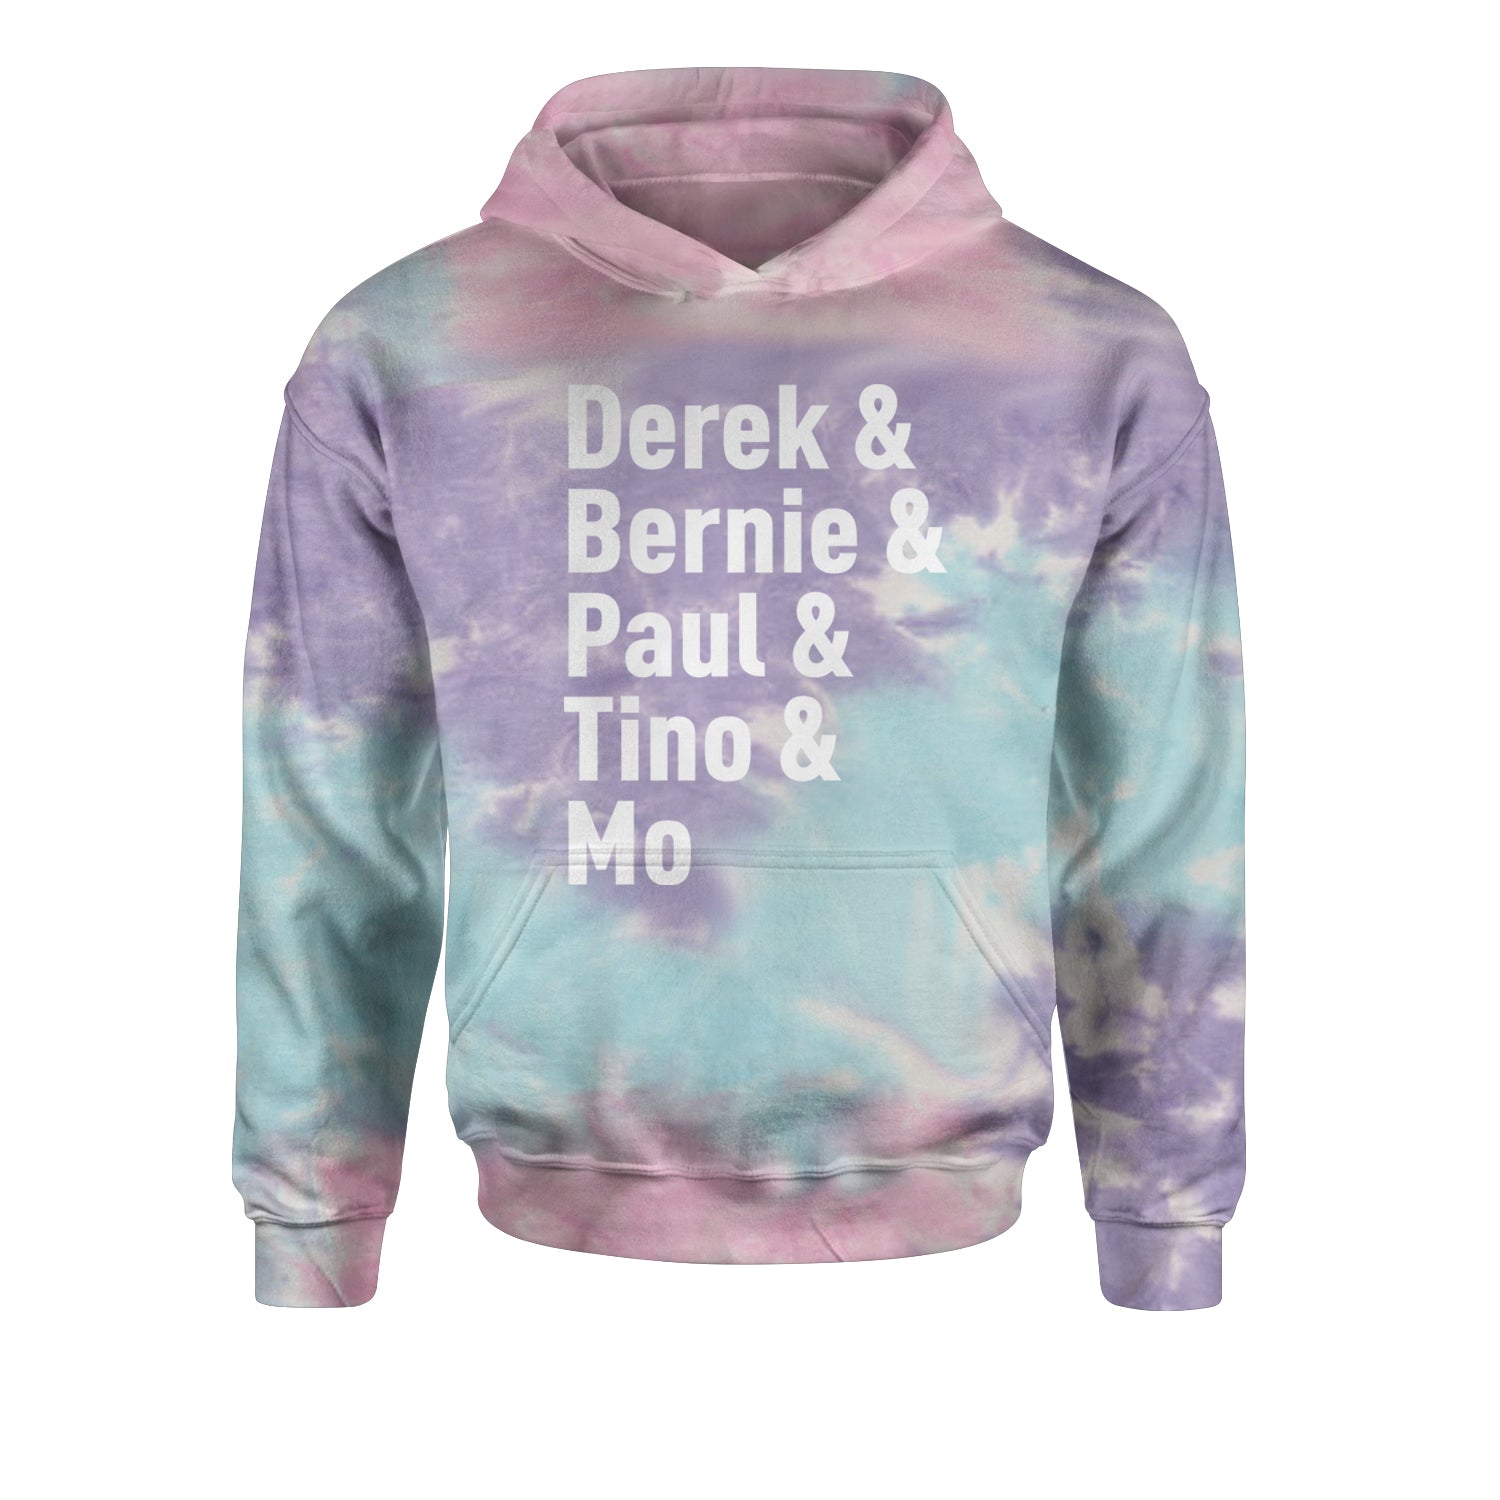 Derek and Bernie and Paul and Tino and Mo Youth-Sized Hoodie baseball, comes, here, judge, the by Expression Tees